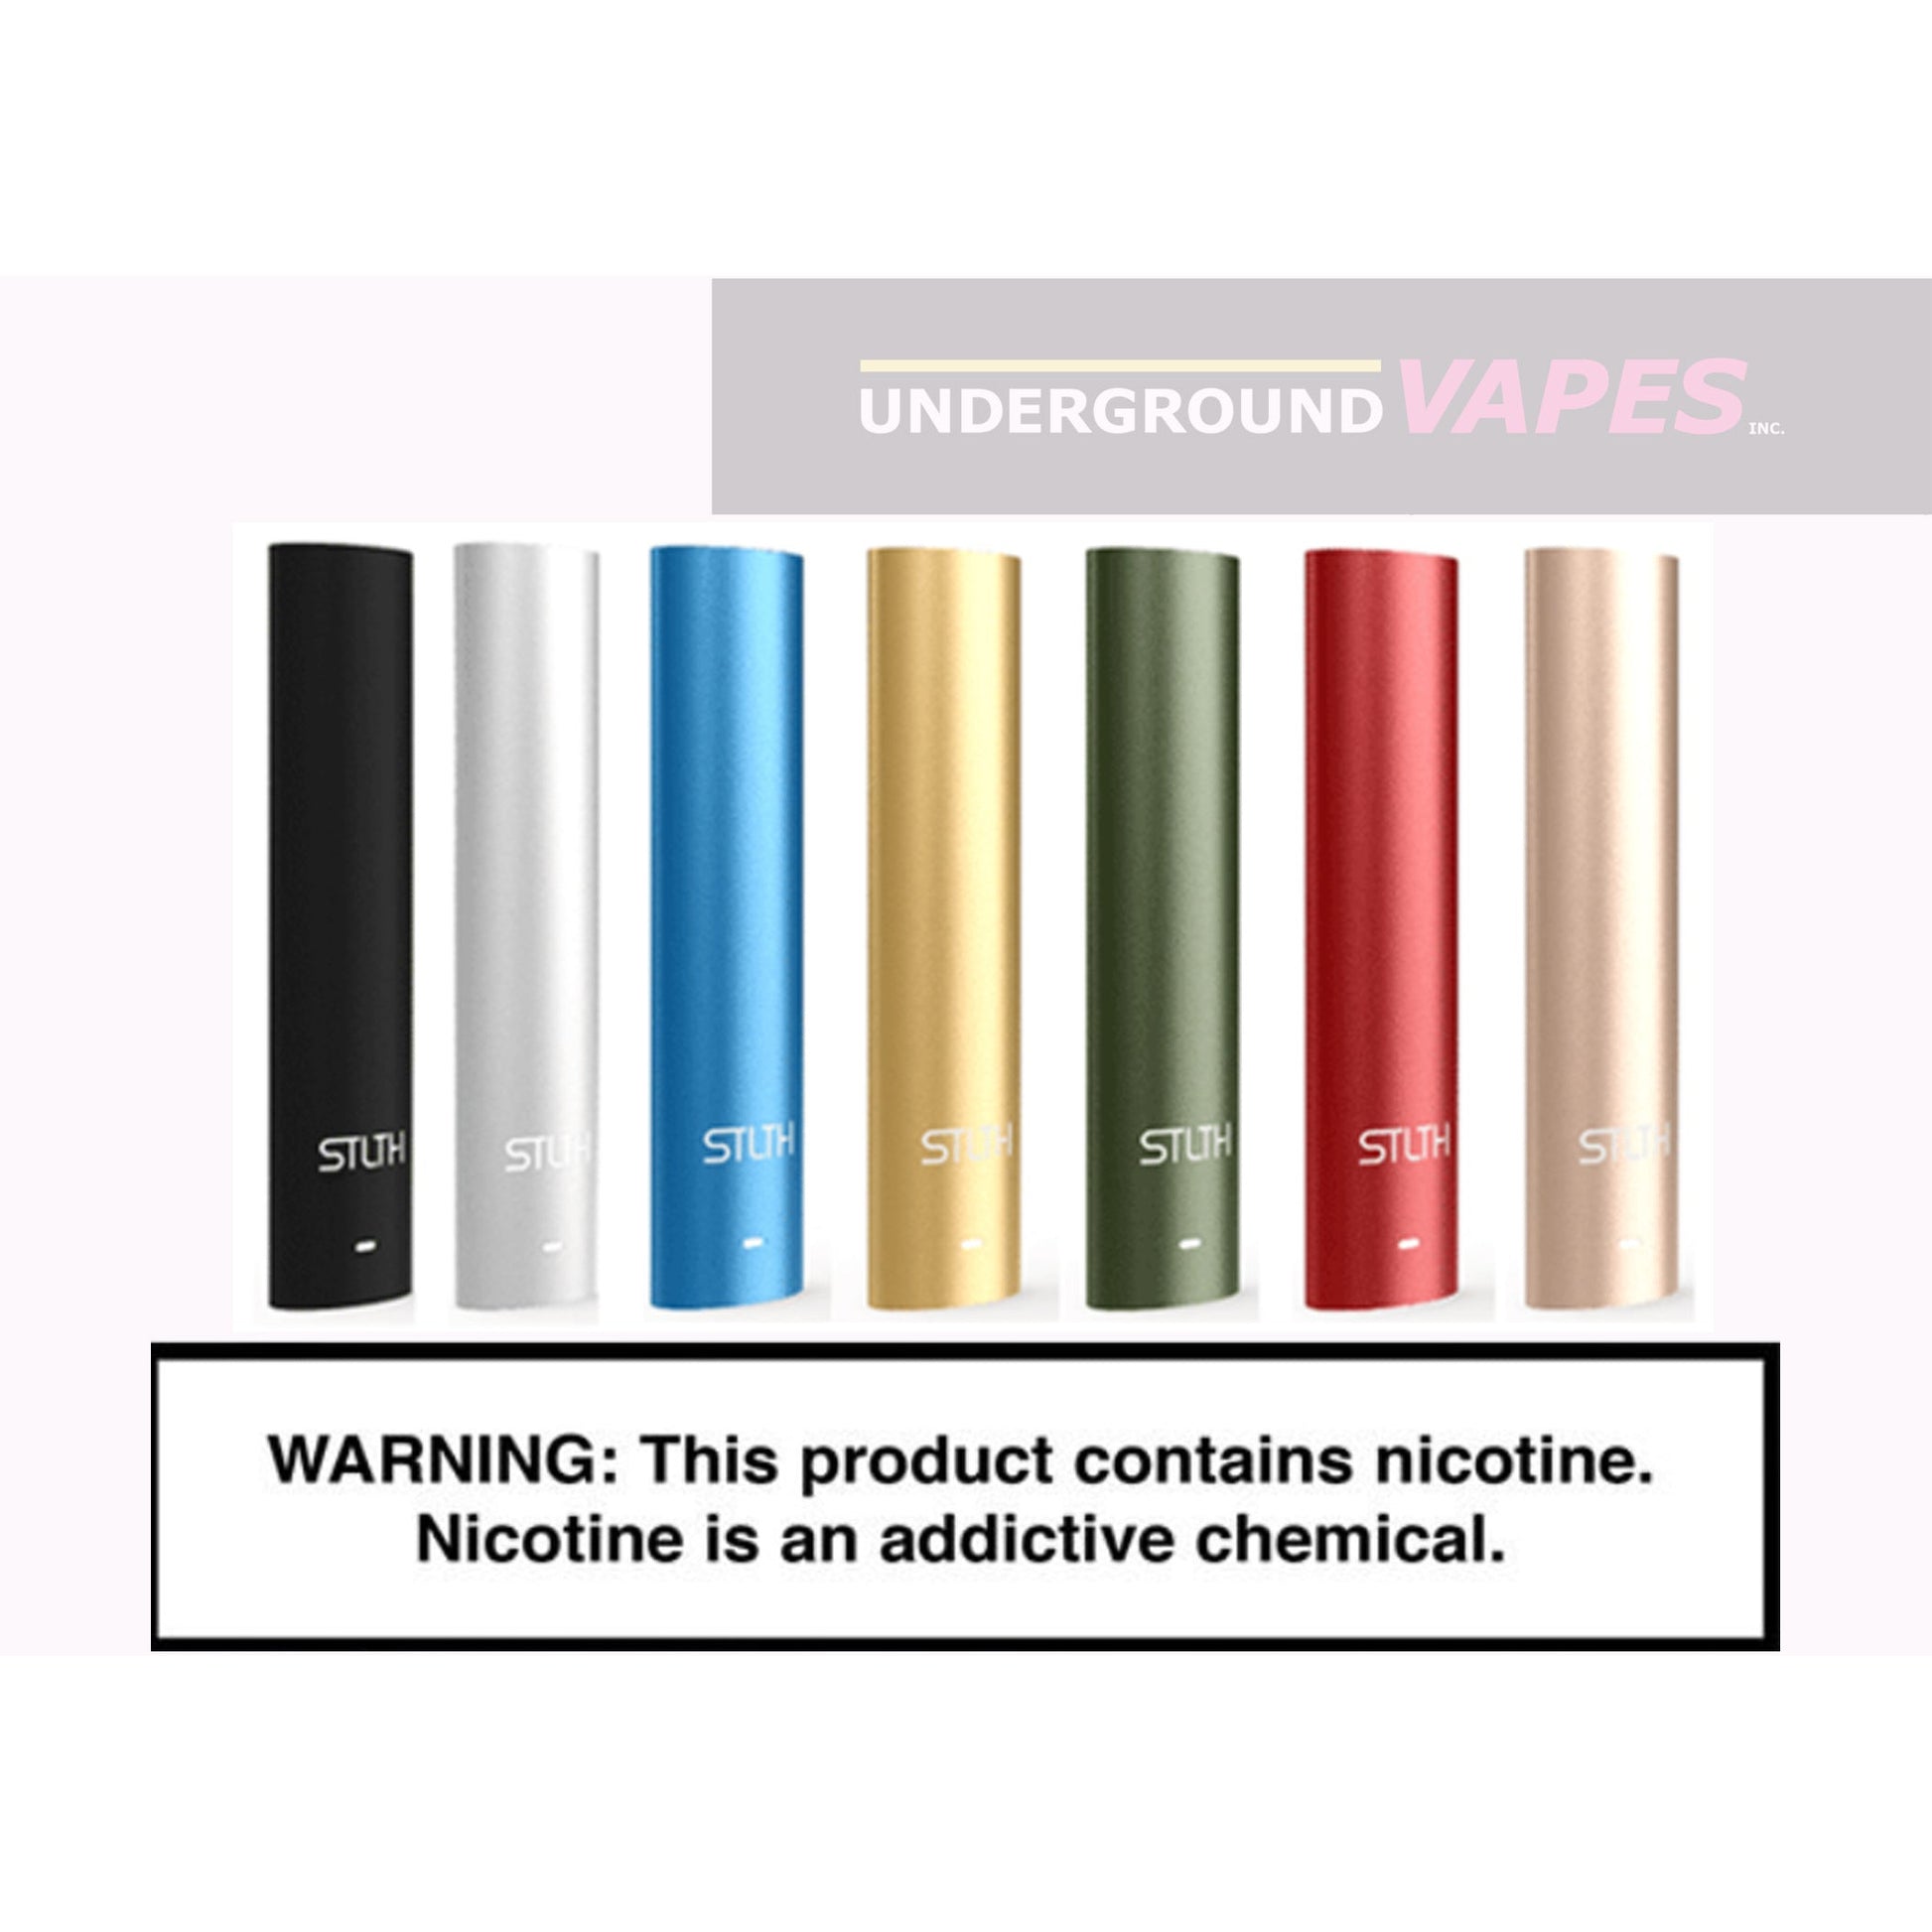 STLTH TYPE-C DEVICE (SEE MENU FOR COLORS) - Underground Vapes Inc - Cambridge